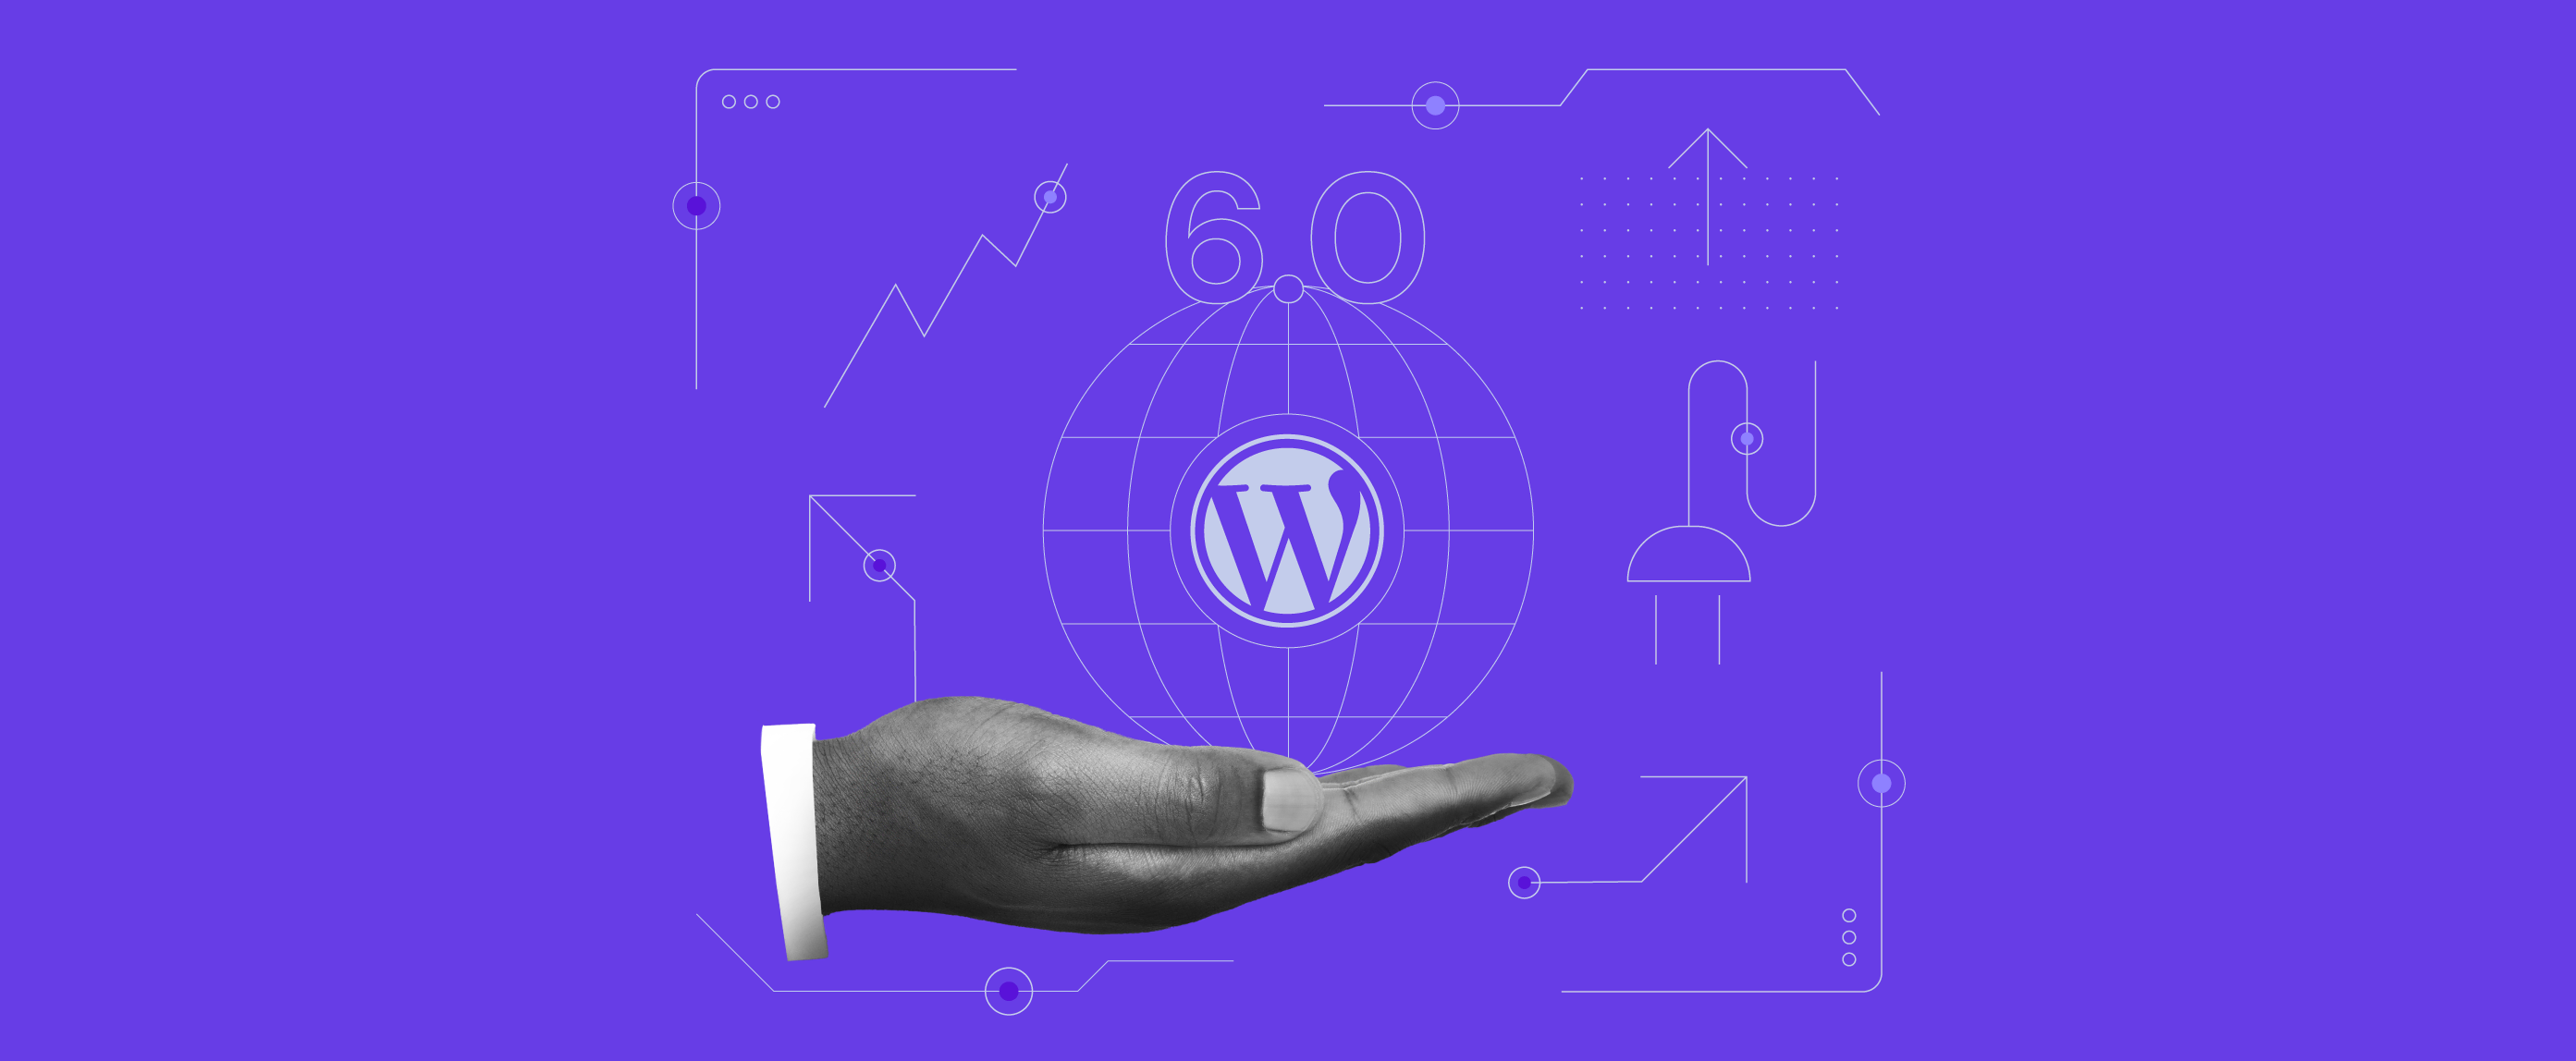 WordPress 6.0 Beta: First Look Into the Next Major Release